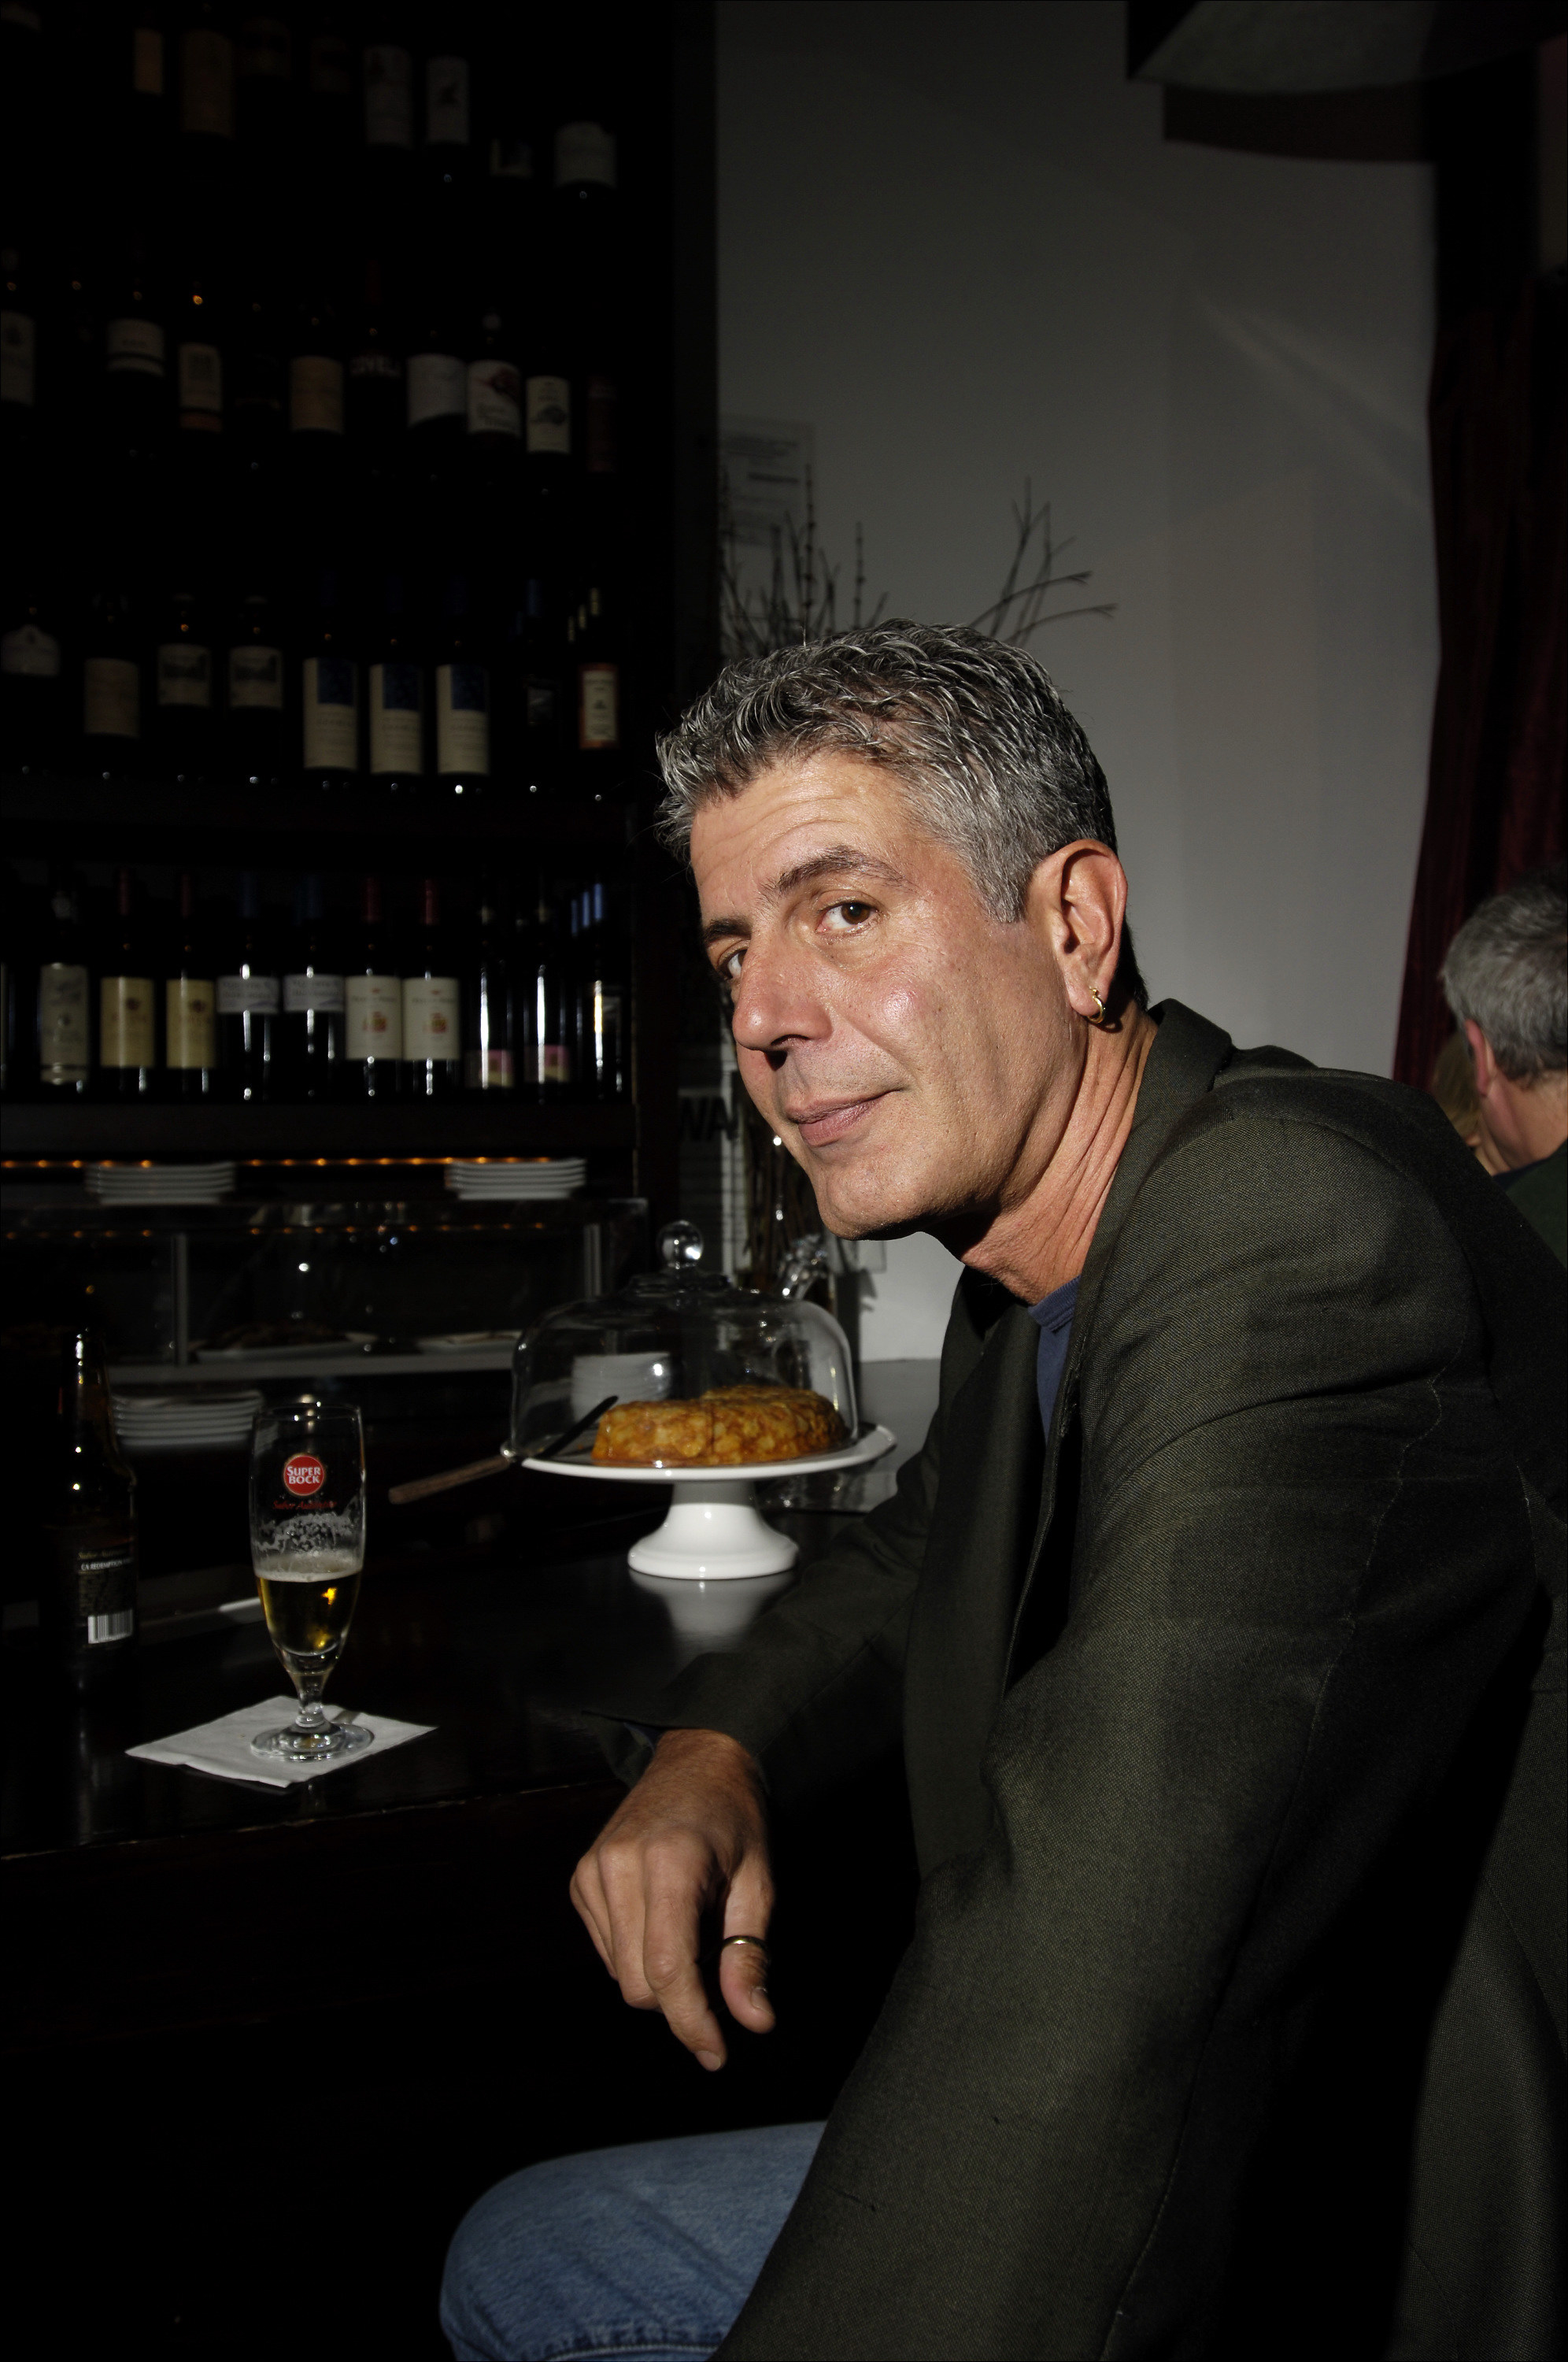 Anthony Bourdain sits at a table with a half-drunk glass of beer and looks to his left at the camera.